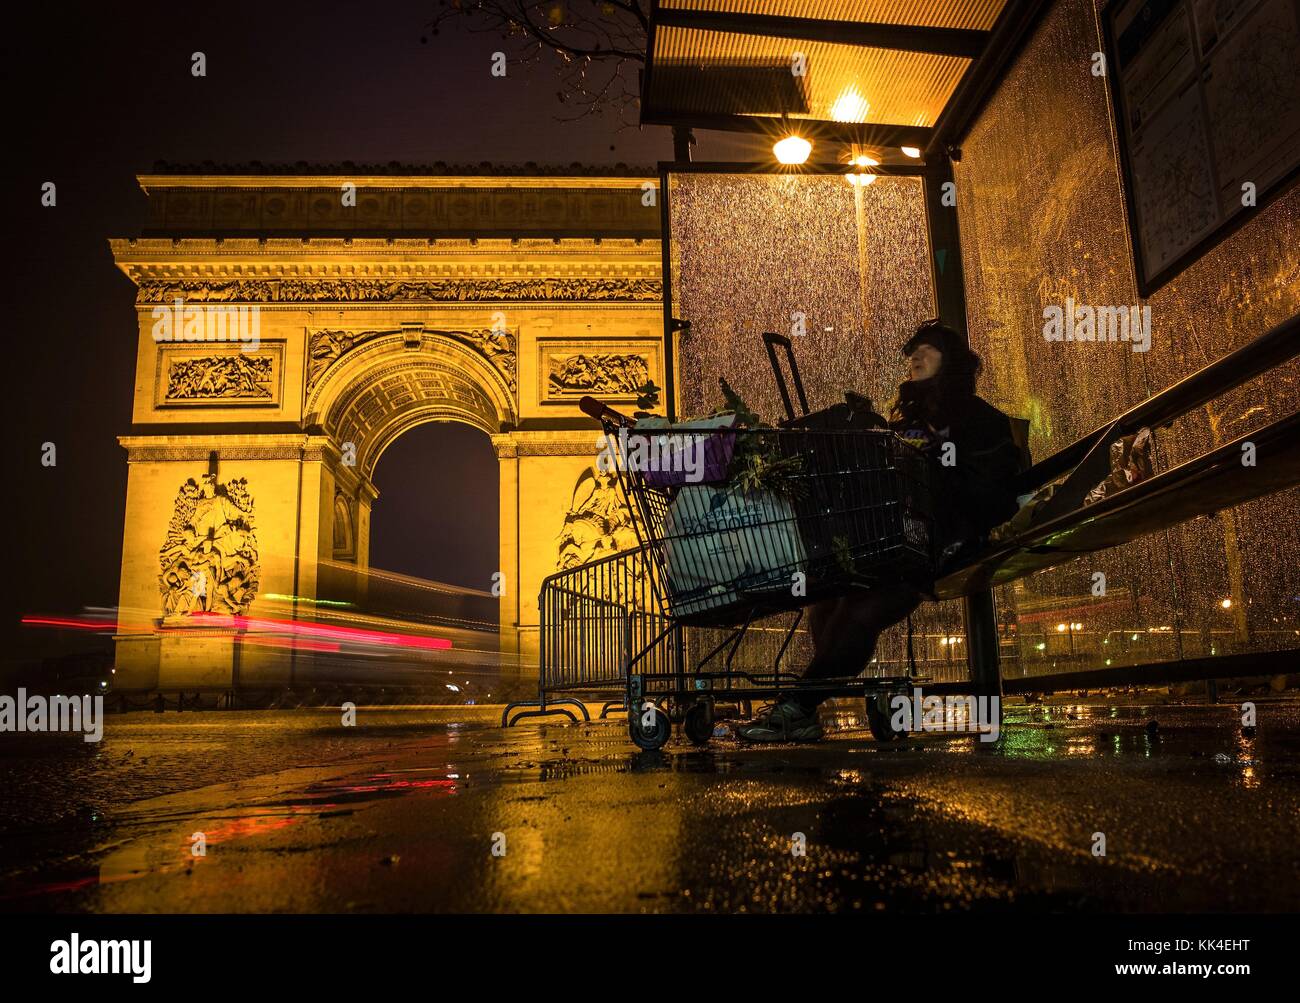 Hell in  france -  04/12/2012  -  France / Ile-de-France (region) / Paris  -  Jenny spends her night as usual for years at the foot of the Arc de Triomphe in the fall   -  Sylvain Leser / Le Pictorium Stock Photo